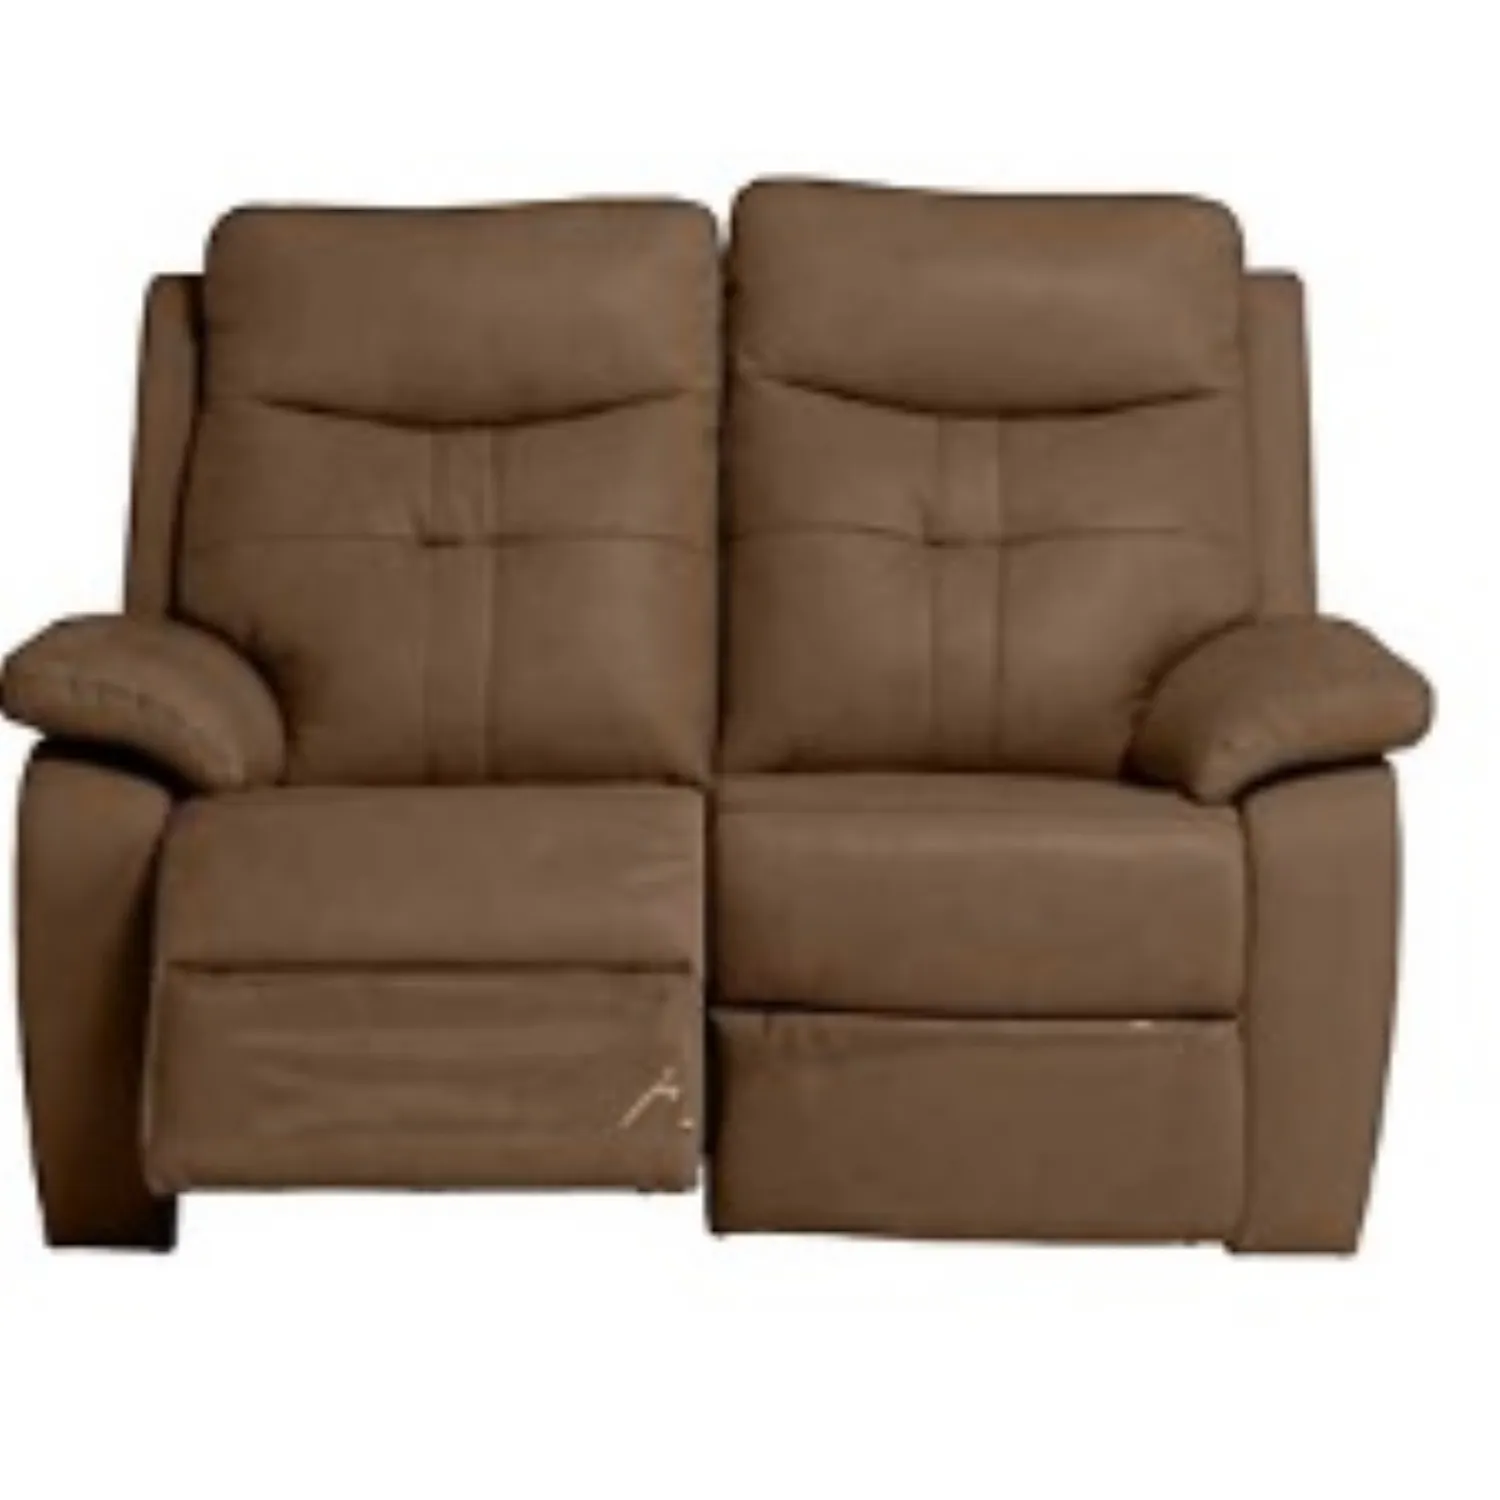 Brown Italian Leather Electric 2 Seater Recliner Sofa